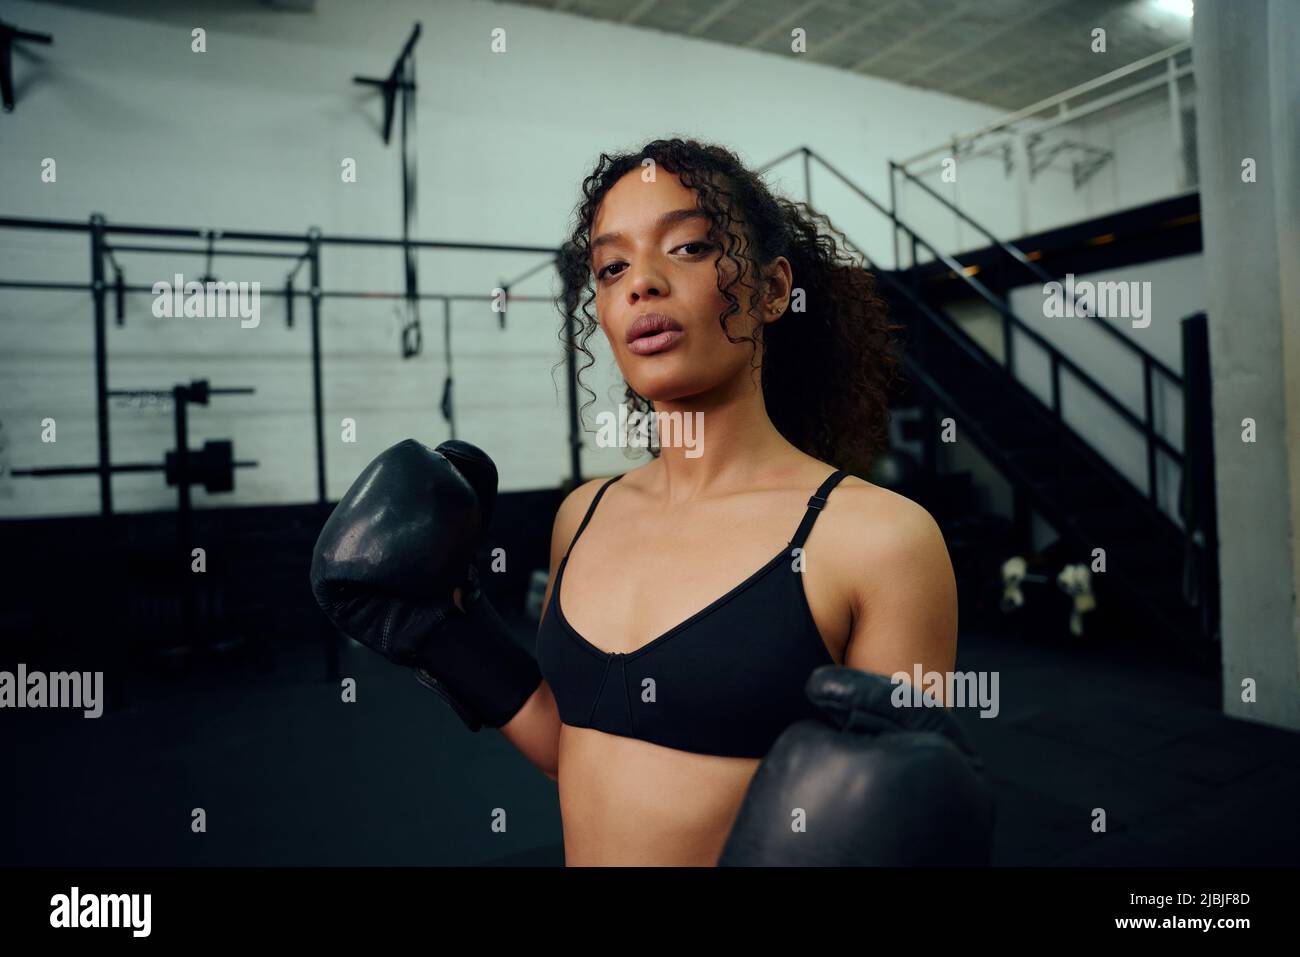 African American female boxer training at the gym with boxing gloves on. Mixed race female holding boxing gloves in air. High quality photo Stock Photo